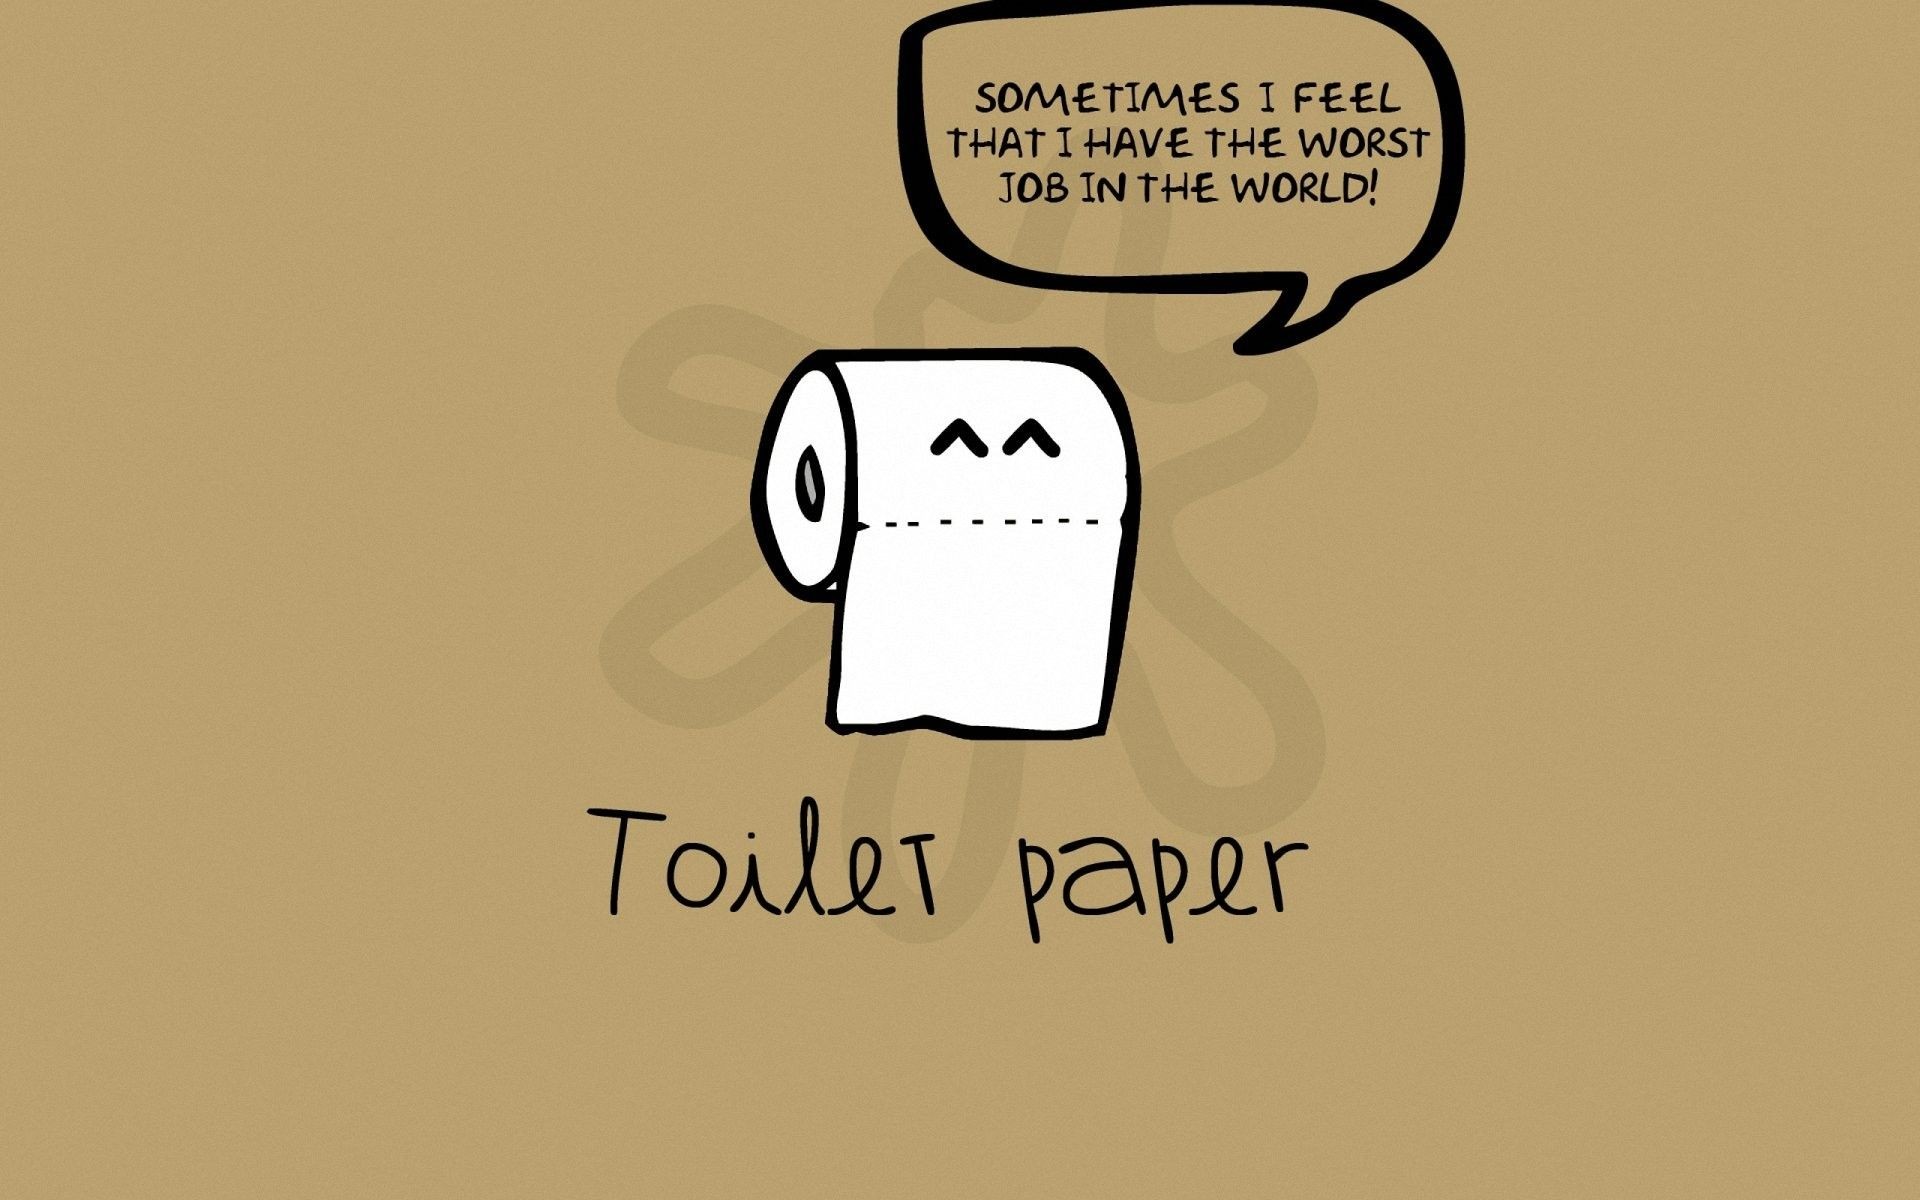 Funny Wallpaper Sayings Best Funny Sayings And Quotes - Toilet Paper Humor  - 1920x1200 Wallpaper 